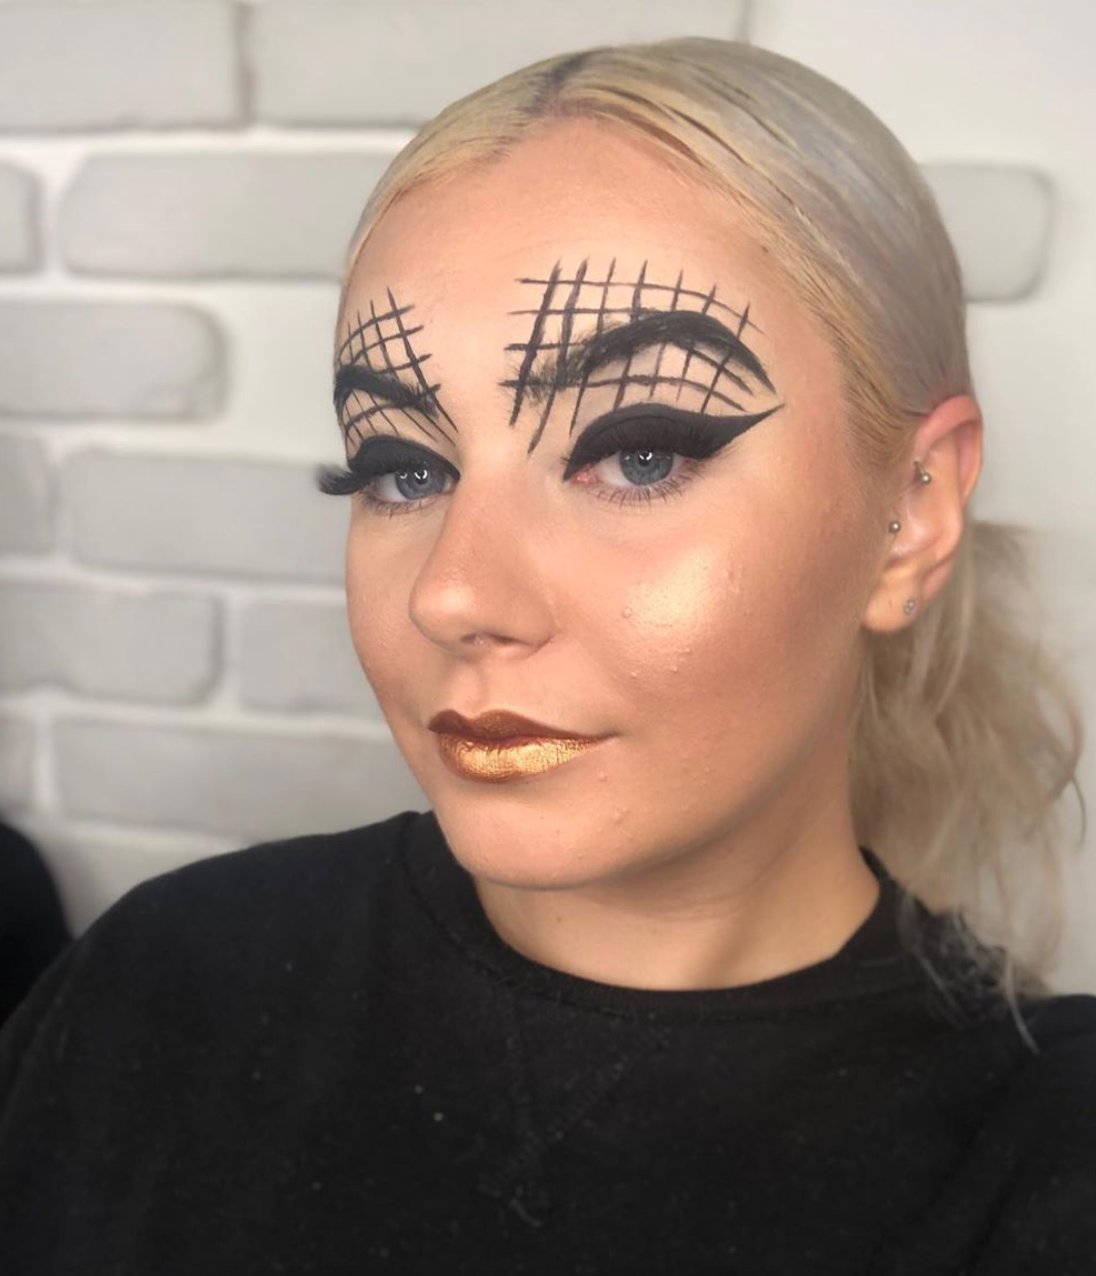 GlamCandy Makeup on Twitter: "We LOVE this McQueen inspired look created by HNC student Aimee. Want to turn a passion into career? Study with us this October! 👉https://t.co/2v8AxJSFNl